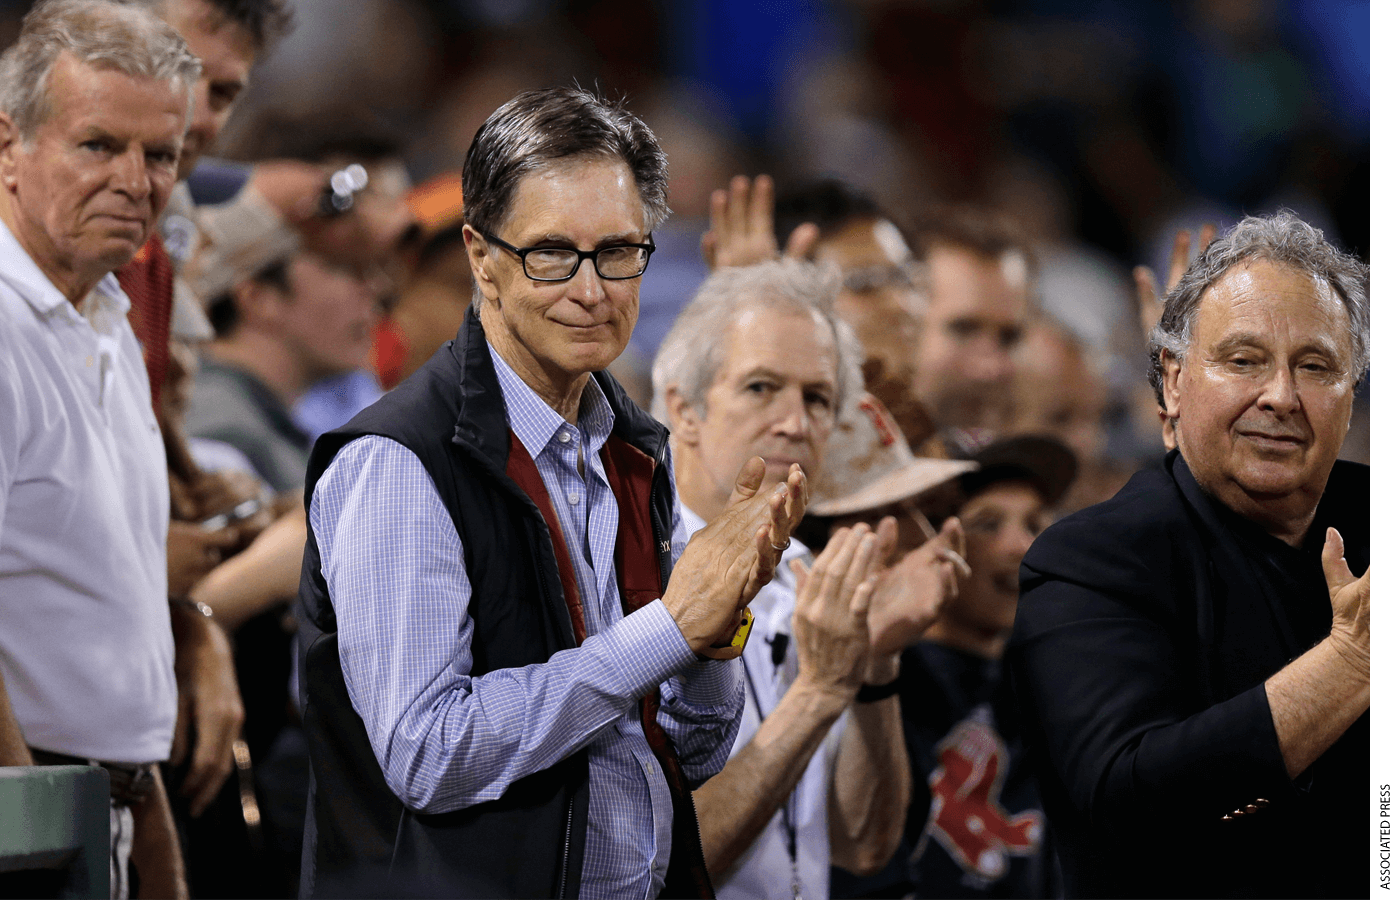 Boston Red Sox owner John Henry during the eighth inning of a baseball game at Fenway Park, Wednesday, June 15, 2016